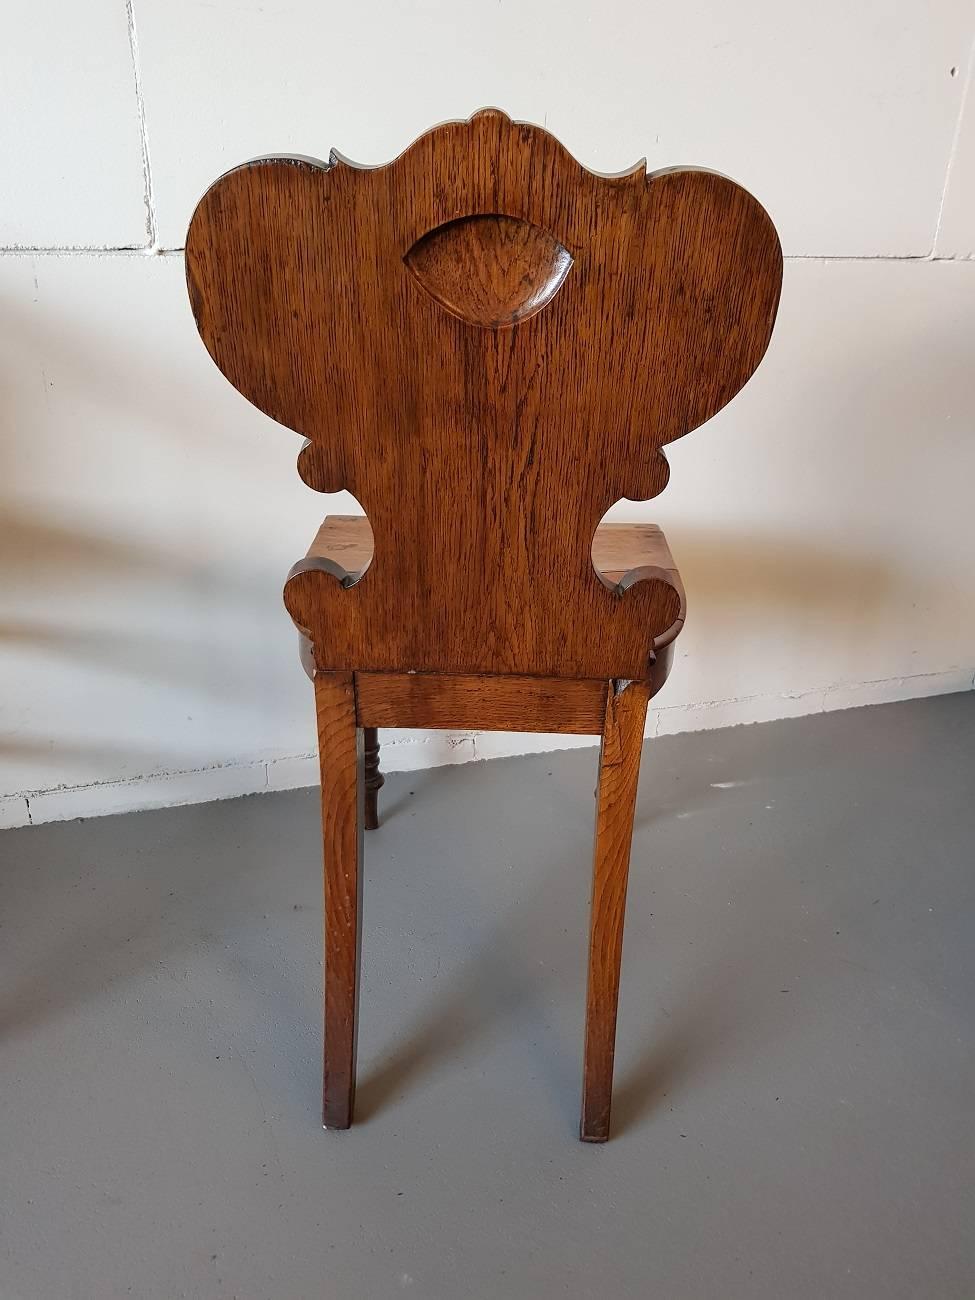 Hand-Crafted Late 18th Century English Oak Chair